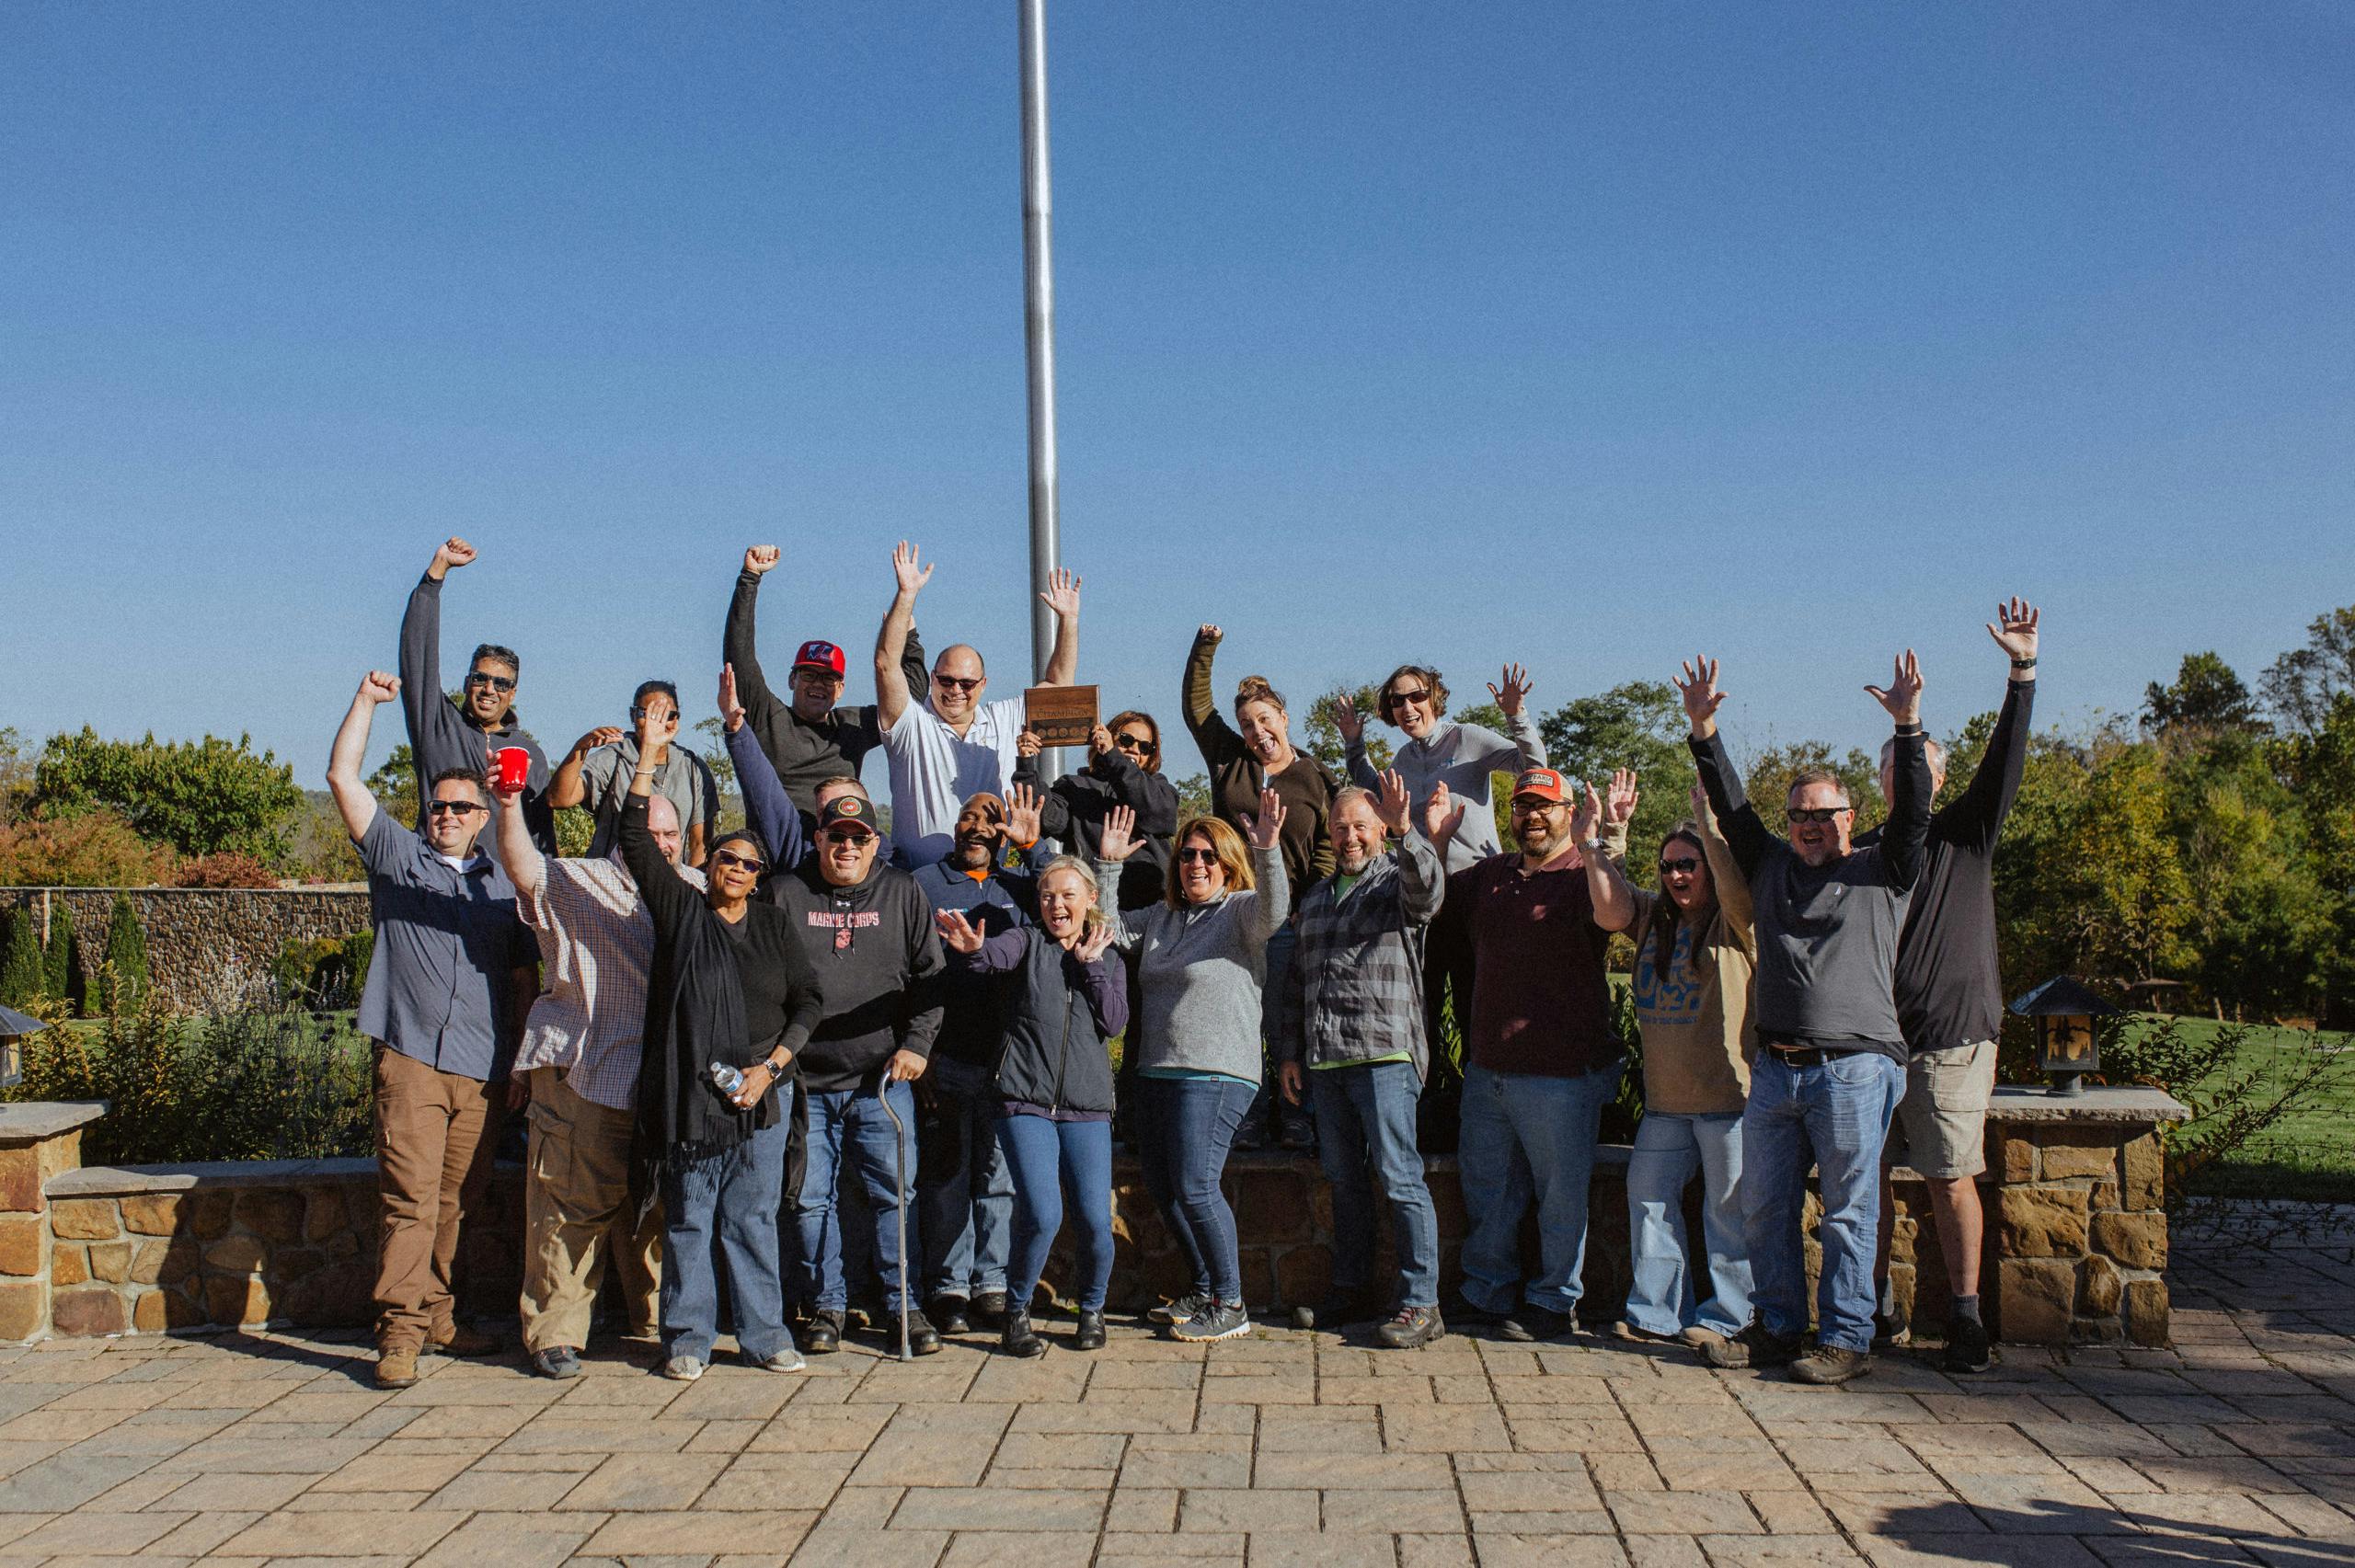 Image of a group of people raising hands as they look at the camera. Related to: vets giving back, hiring vets, hiring veterans, government contractor hiring veterans, charity work, charity work for vets, vets supporting vets